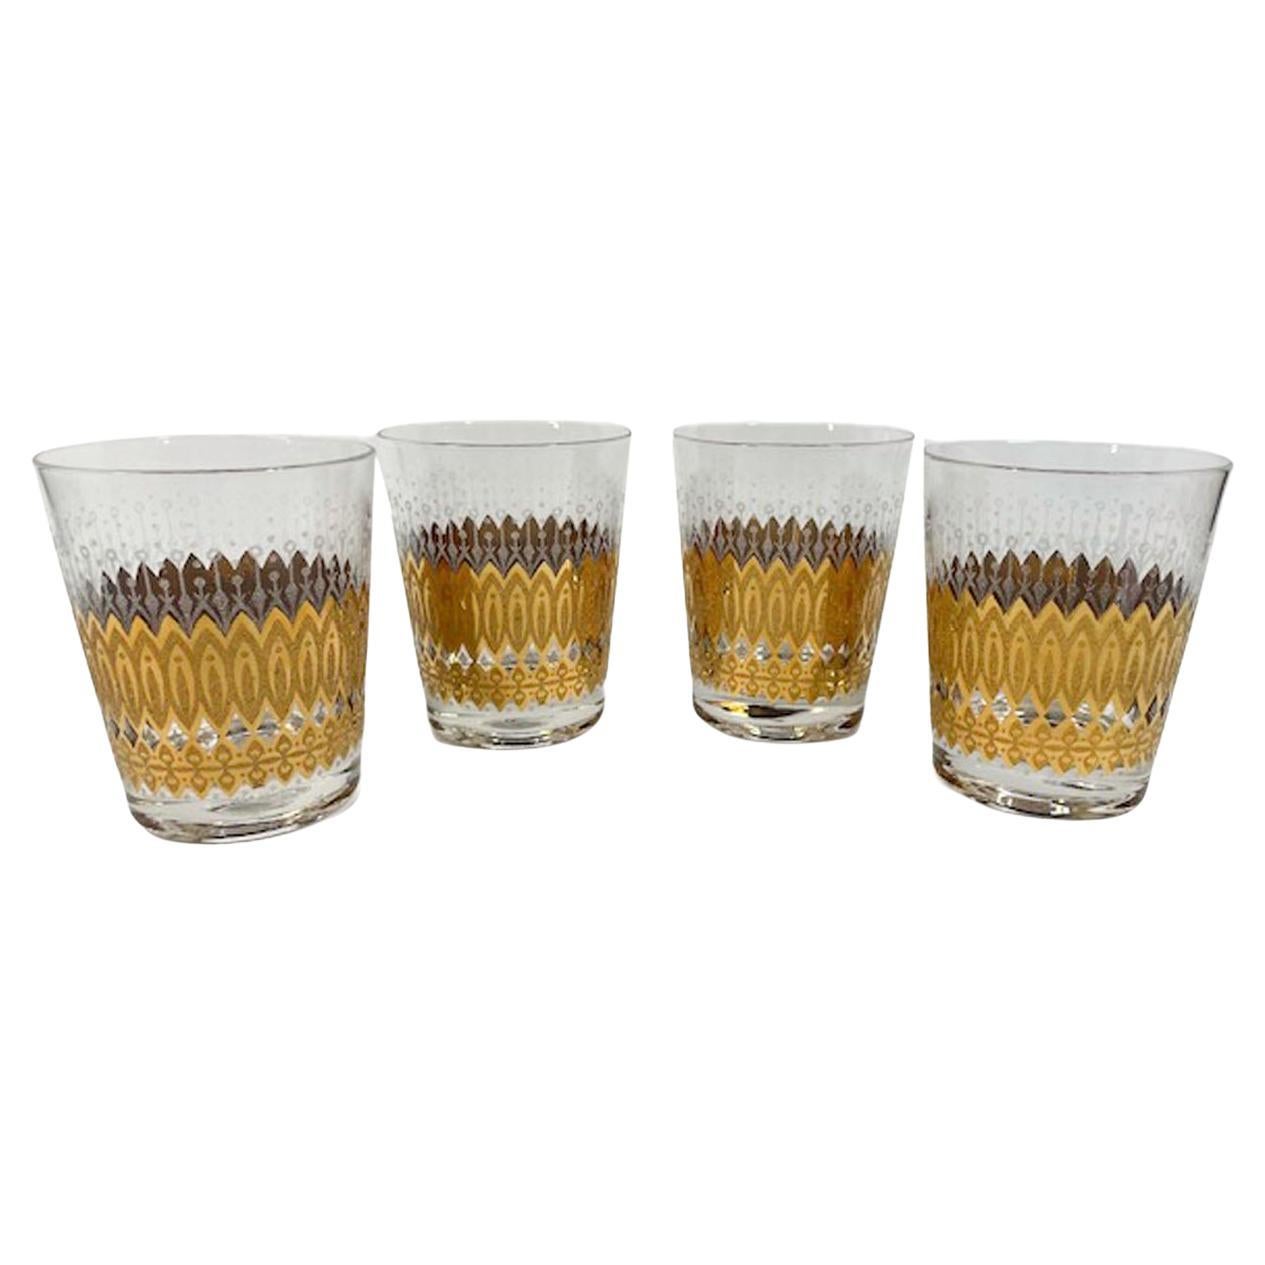 Set of 4 Pasinski Double Old Fashion Glasses with 22k Gold and White Frosting